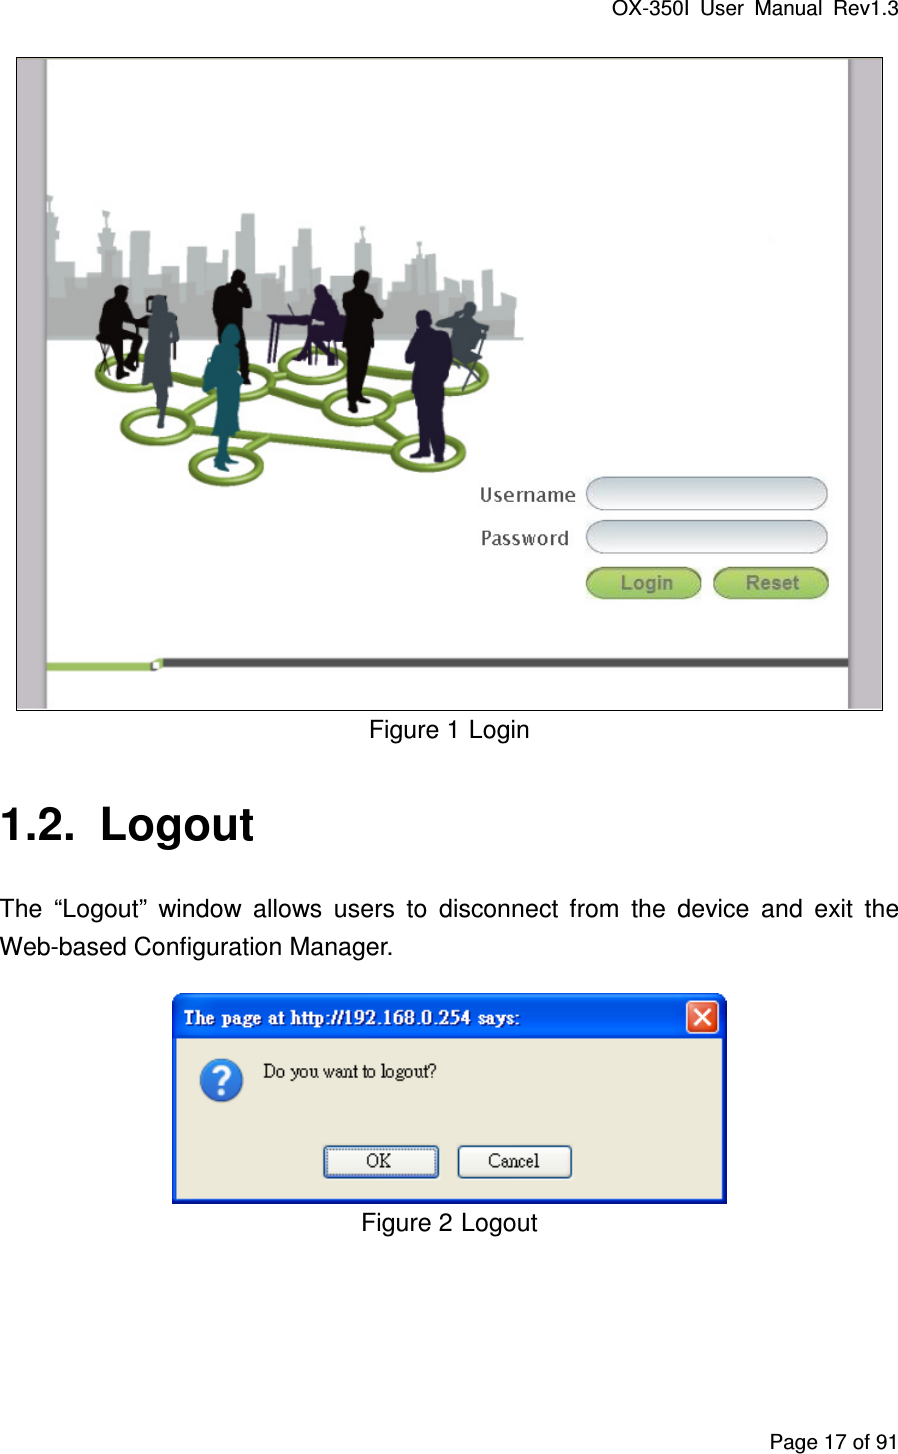 OX-350I  User  Manual  Rev1.3 Page 17 of 91  Figure 1 Login 1.2.  Logout The  “Logout”  window  allows  users  to  disconnect  from  the  device  and  exit  the Web-based Configuration Manager.  Figure 2 Logout 